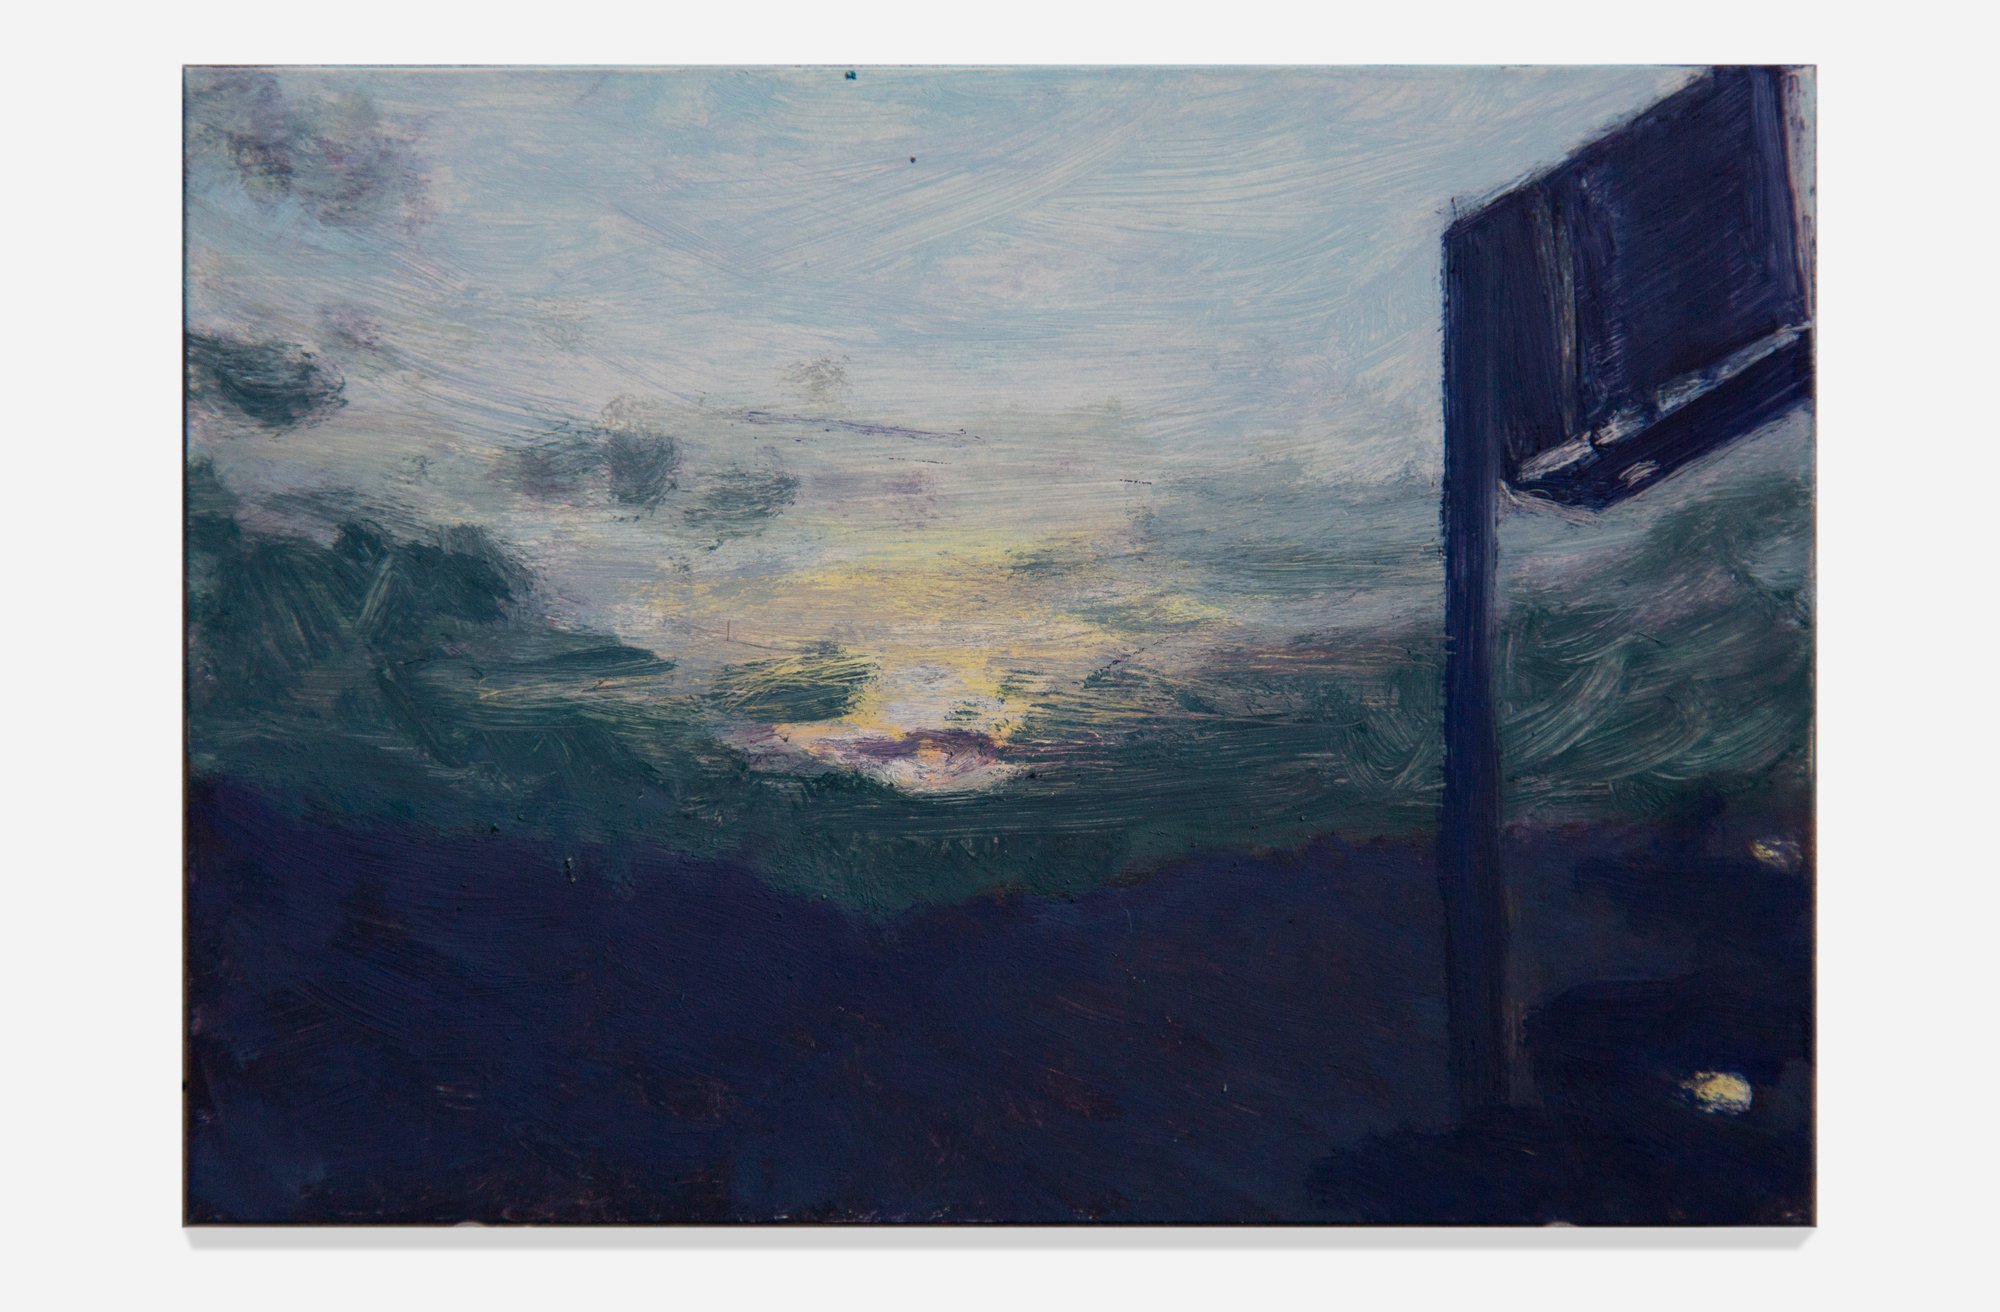     Untitled (Sky Series) , 2021, Oil on clay coated panel, 5 x 7”     